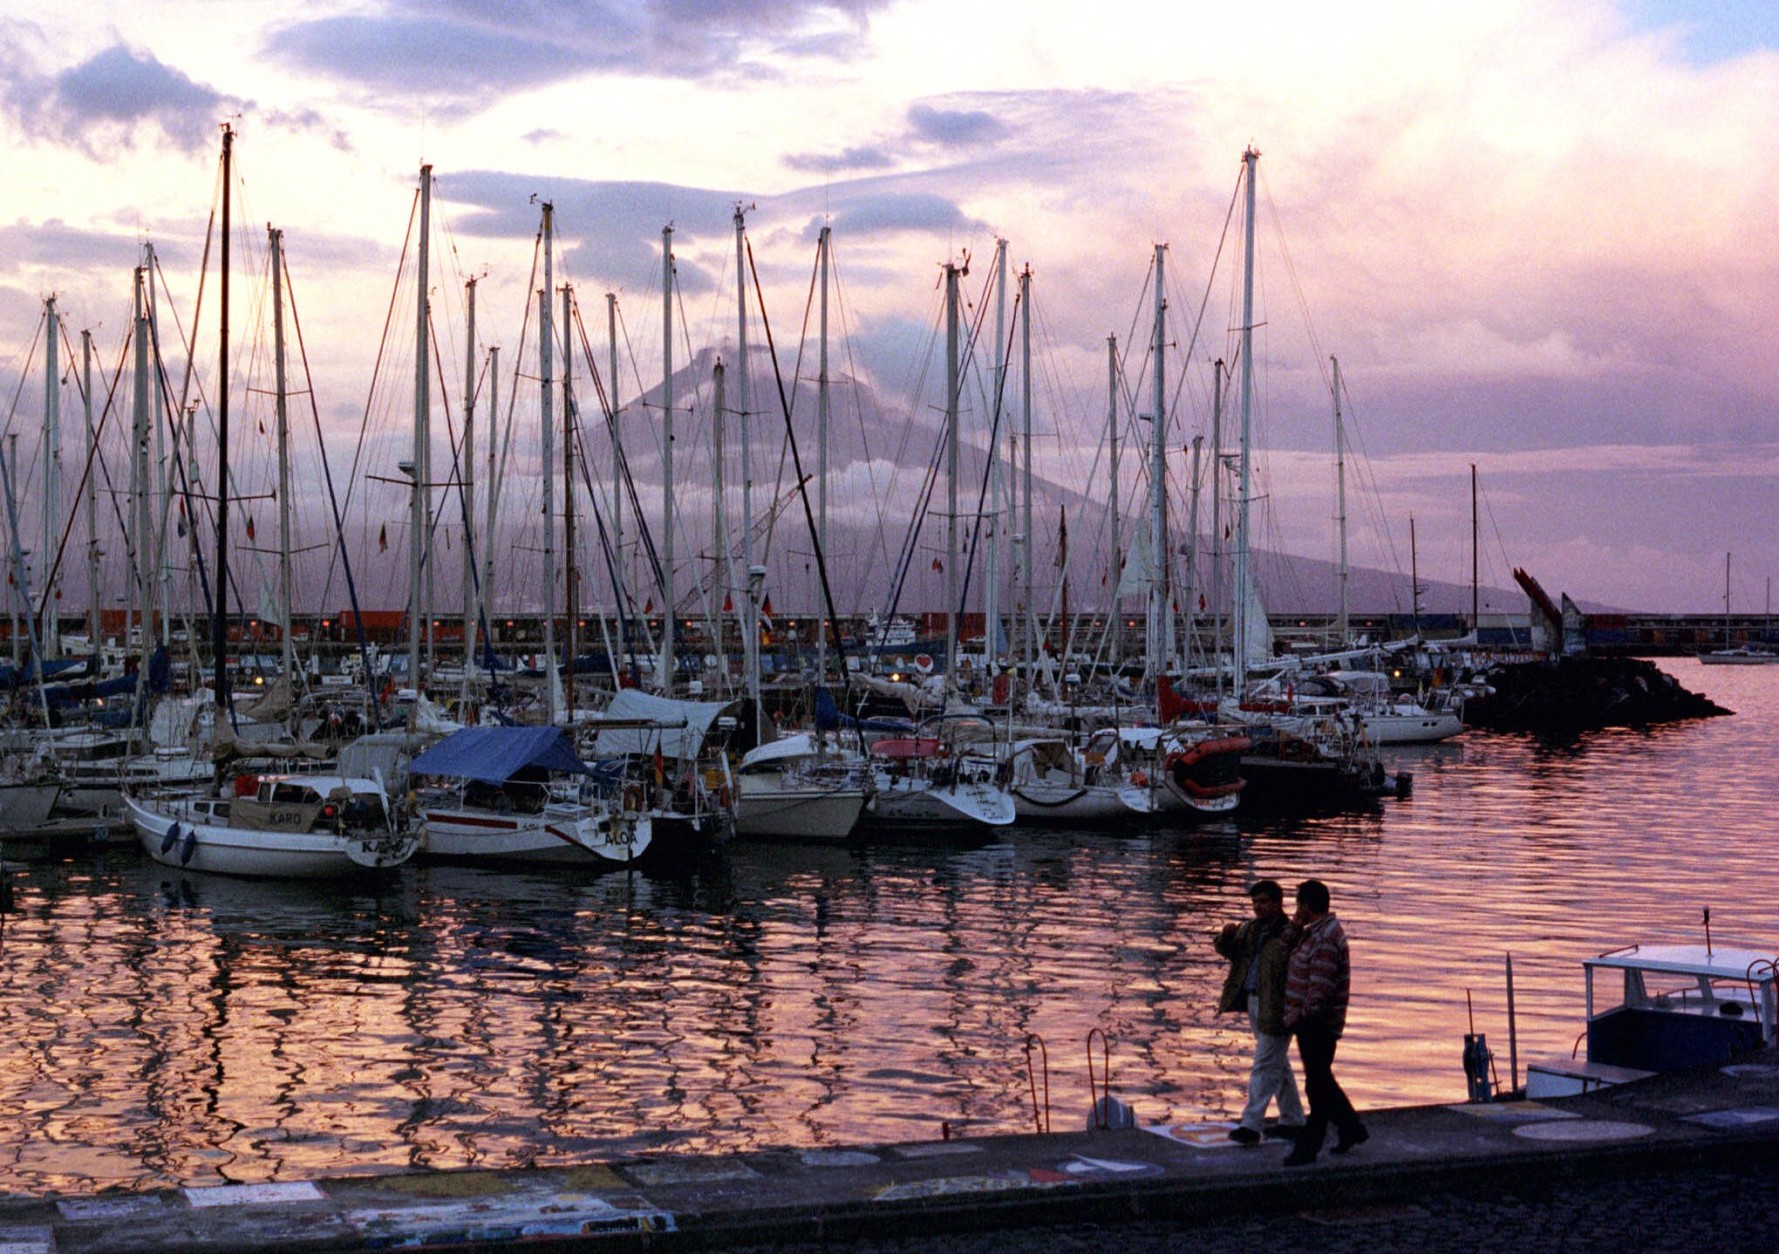 Two yachtsmen walk along the Horta harbor at sunset on the Azores island of Faial, June 18, 1999. The 7,755-foot-high (2,350 meter) volcanic peak of Pico island rises in the background. Transatlantic yachtsmen are increasingly being joined by tourists to the nine small islands of the Azores, seeking a natural, unspoiled escape from the stress of city life. (AP Photo/Armando Franca)